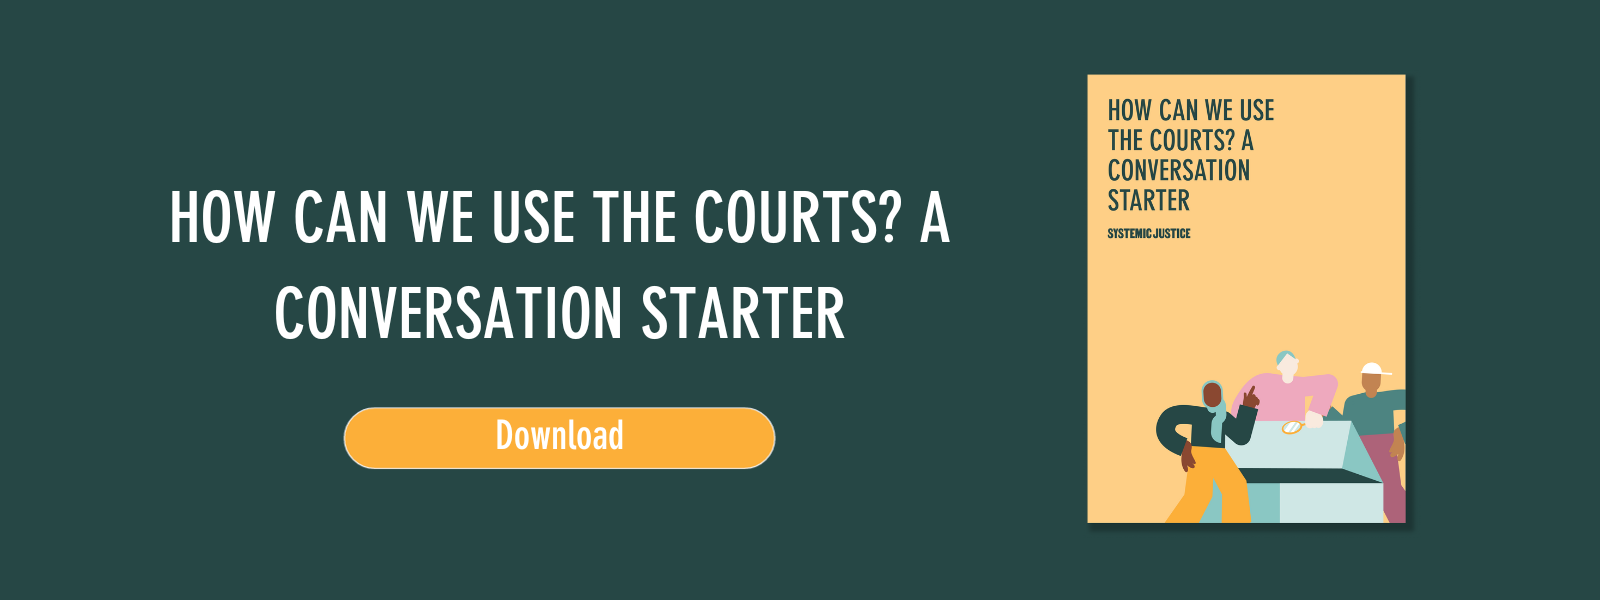 How can we use the courts? A conversation starter